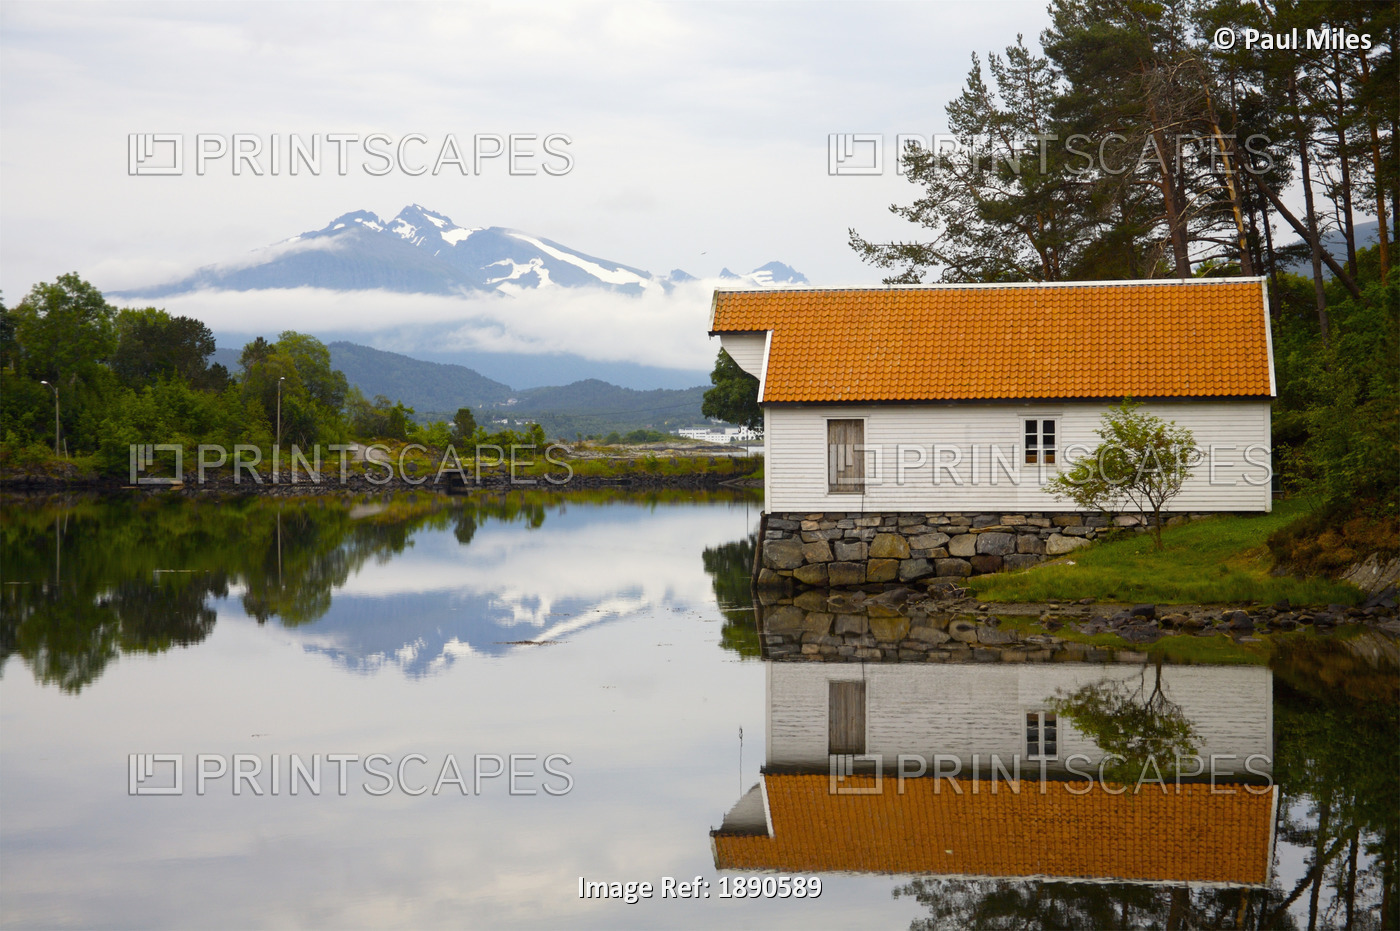 Open-Air Museum, Cottage Reflecting In Lake